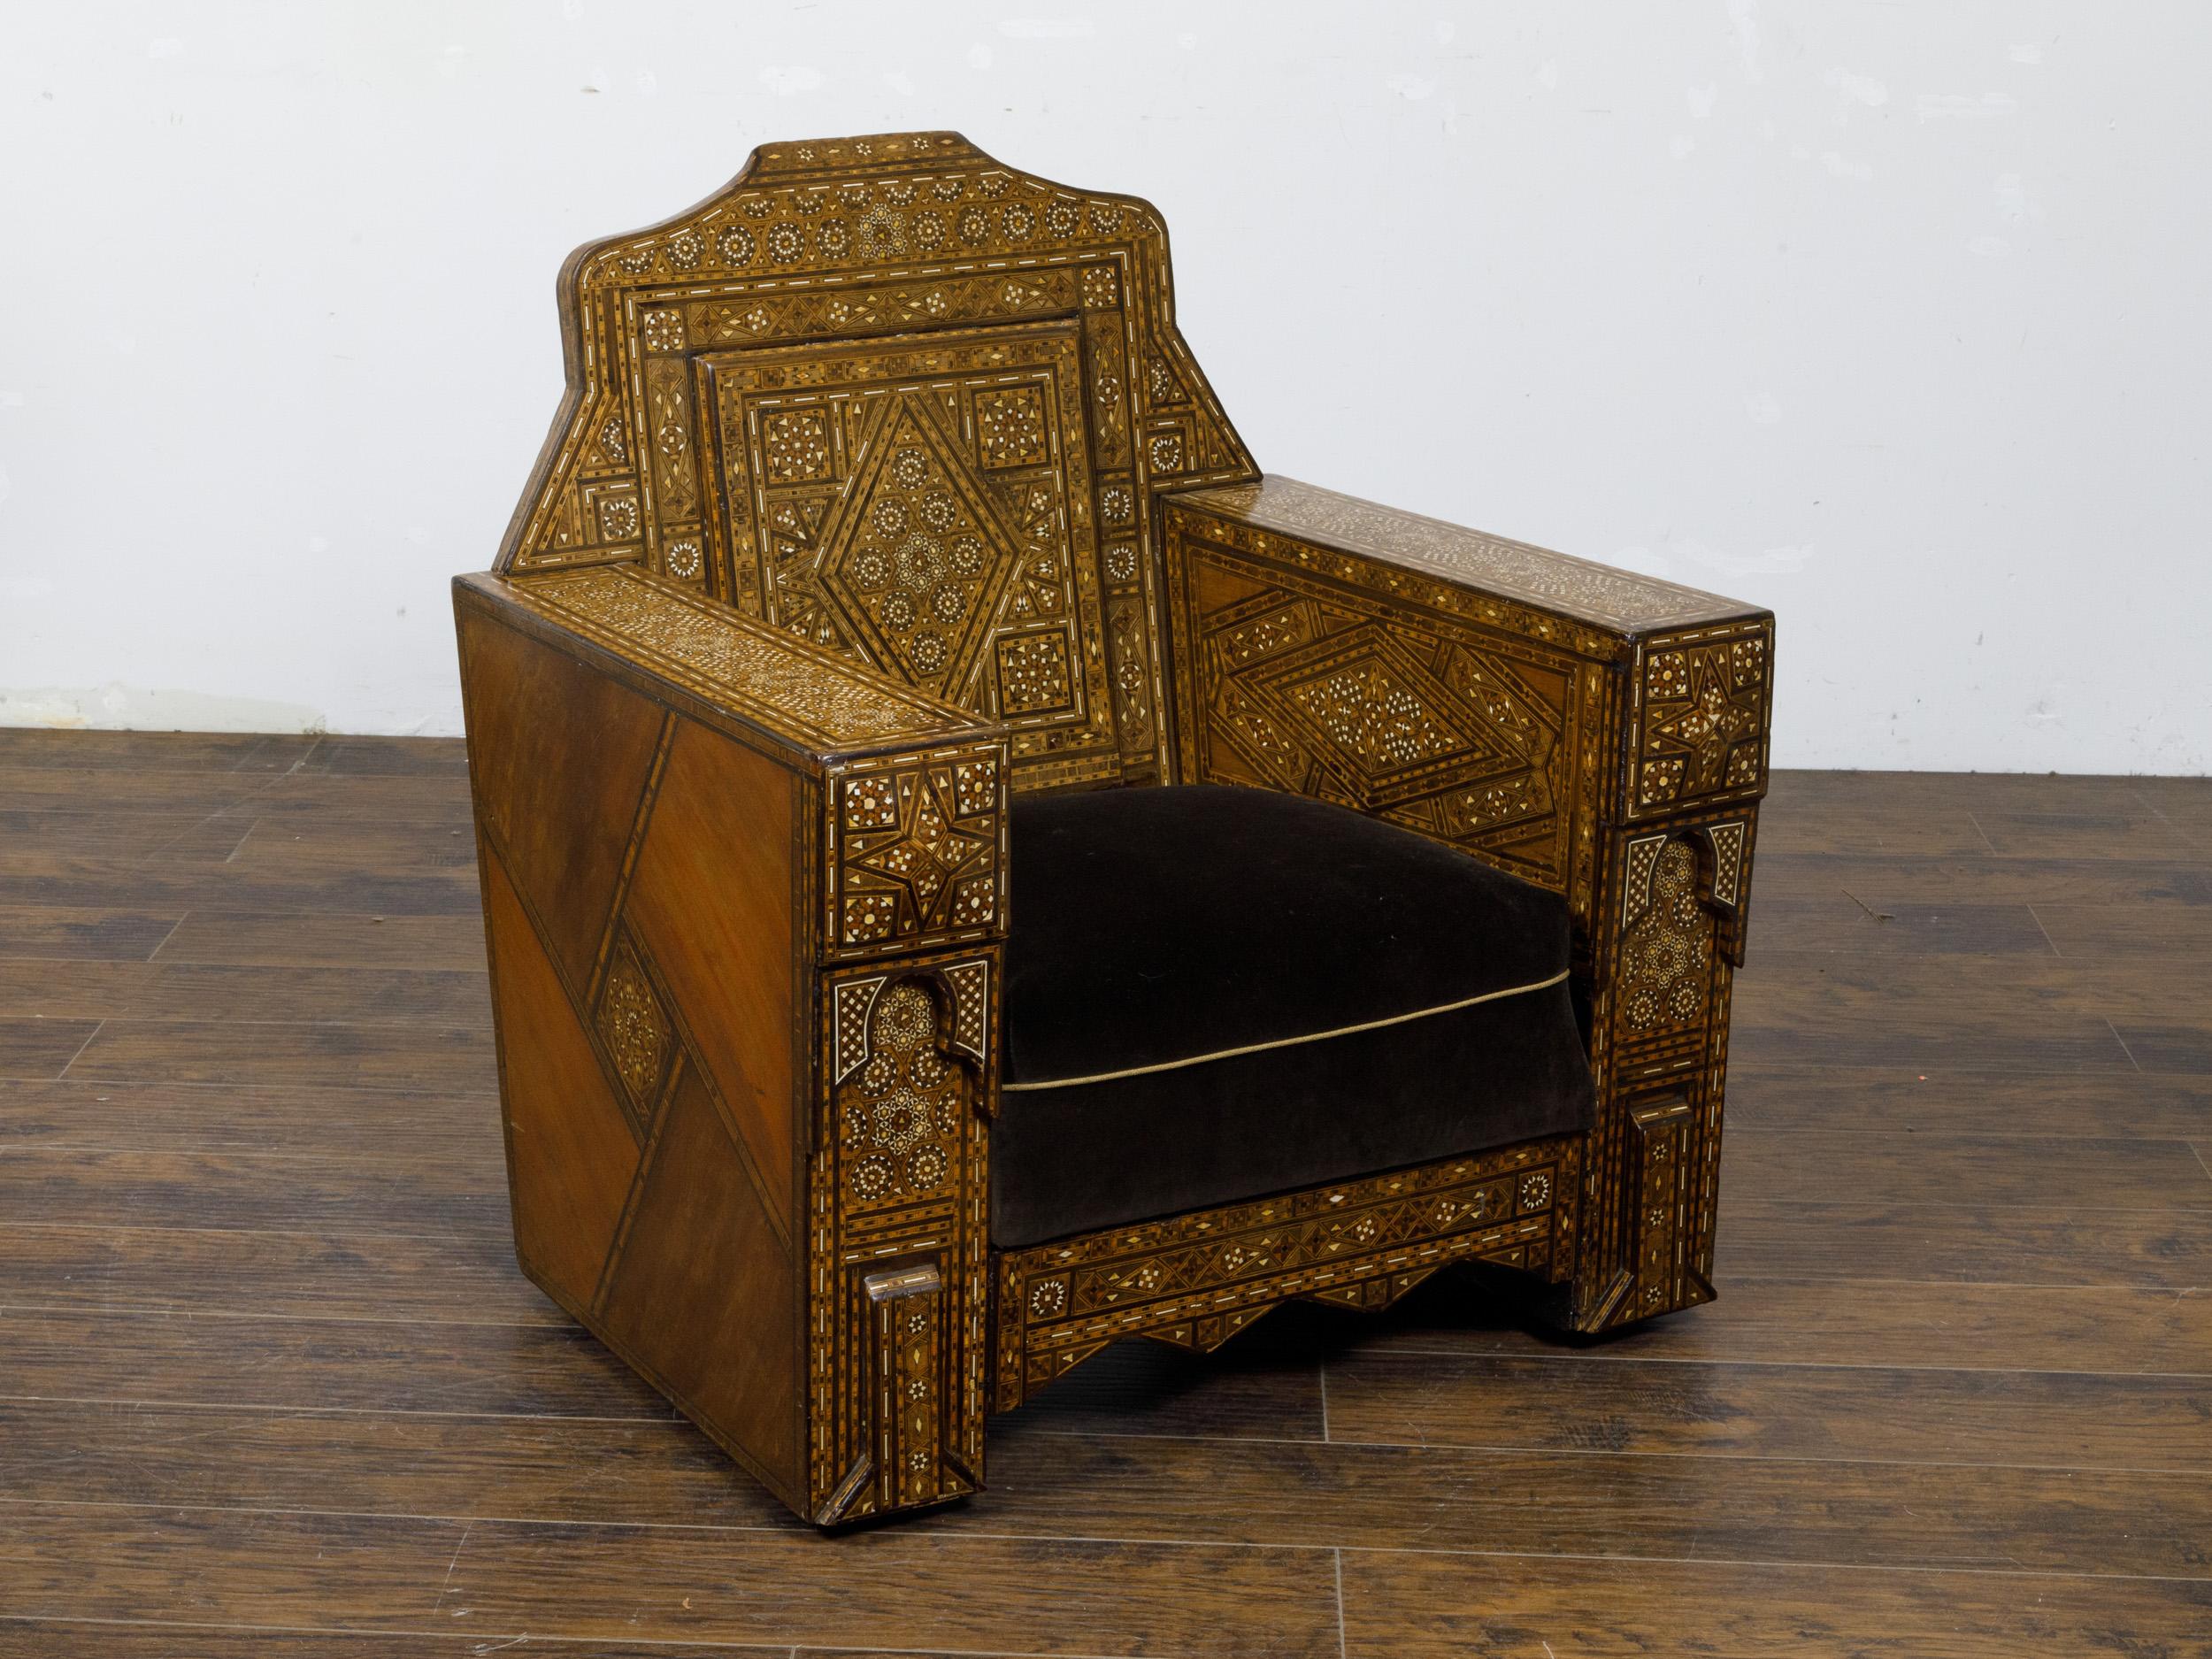 An Moroccan club chair from circa 1900 with abundant geometric bone inlay and custom cushion. This Moroccan club chair, hailing from the early 20th century, is a masterpiece of craftsmanship and aesthetic appeal, featuring an opulent geometric bone